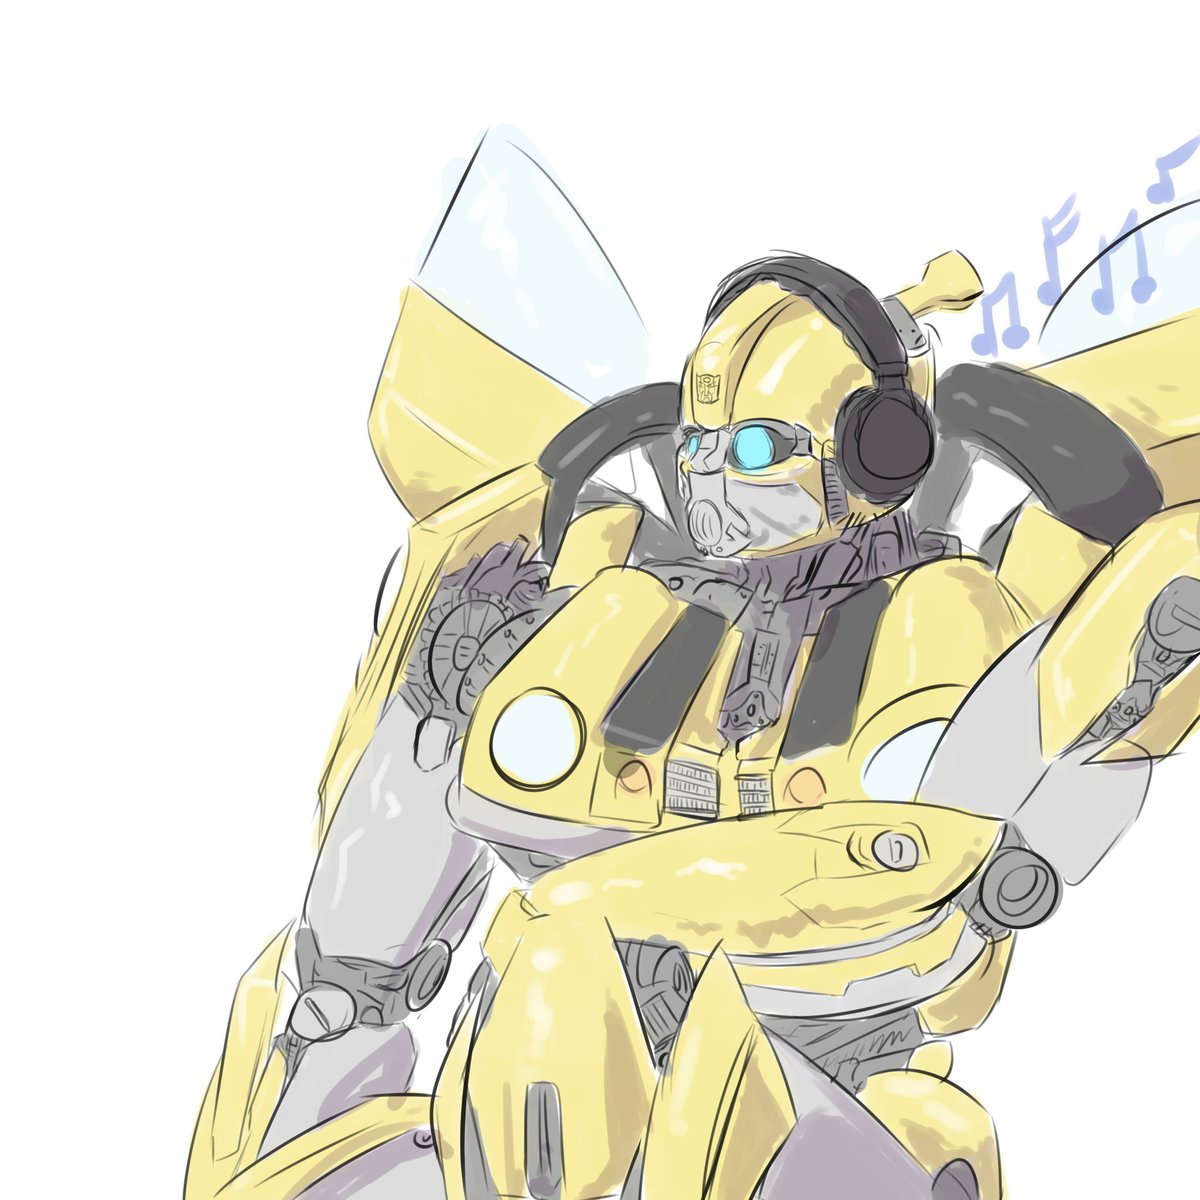 what kind of music do u think he listens to?
#transfomers #bumblebee